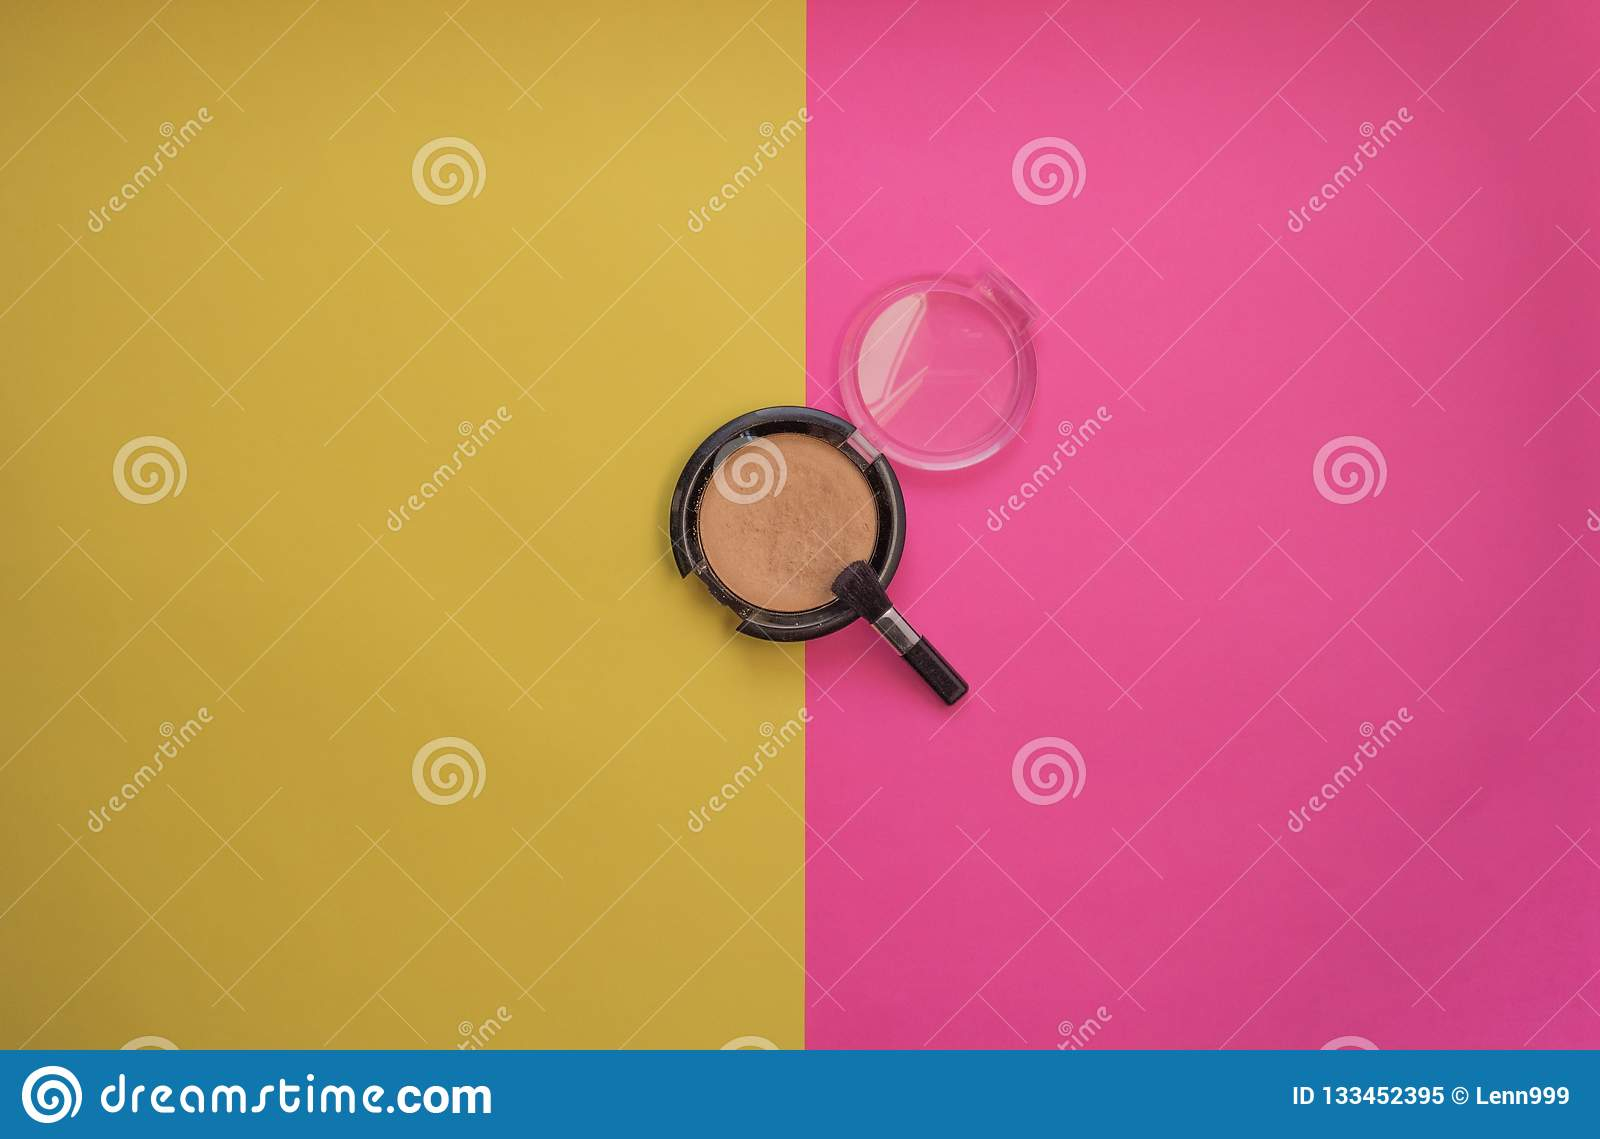 Pink And Yellow Eye Makeup Yellow Eyeshadow On A Two Color Background Stock Image Image Of